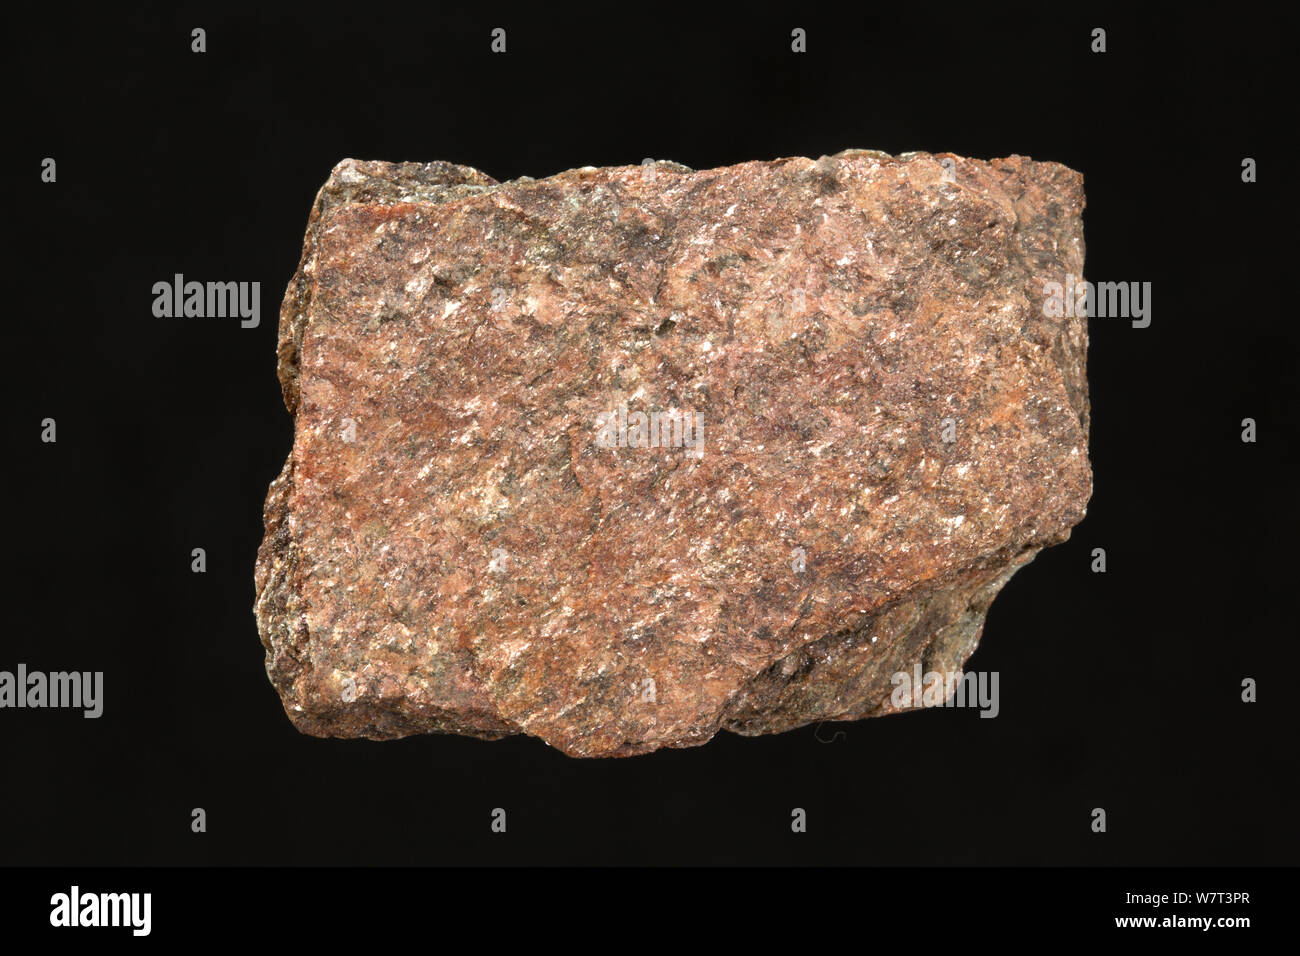 Mica Schist, a metamorphic rock containing mica crystals, from Nevada. Stock Photo